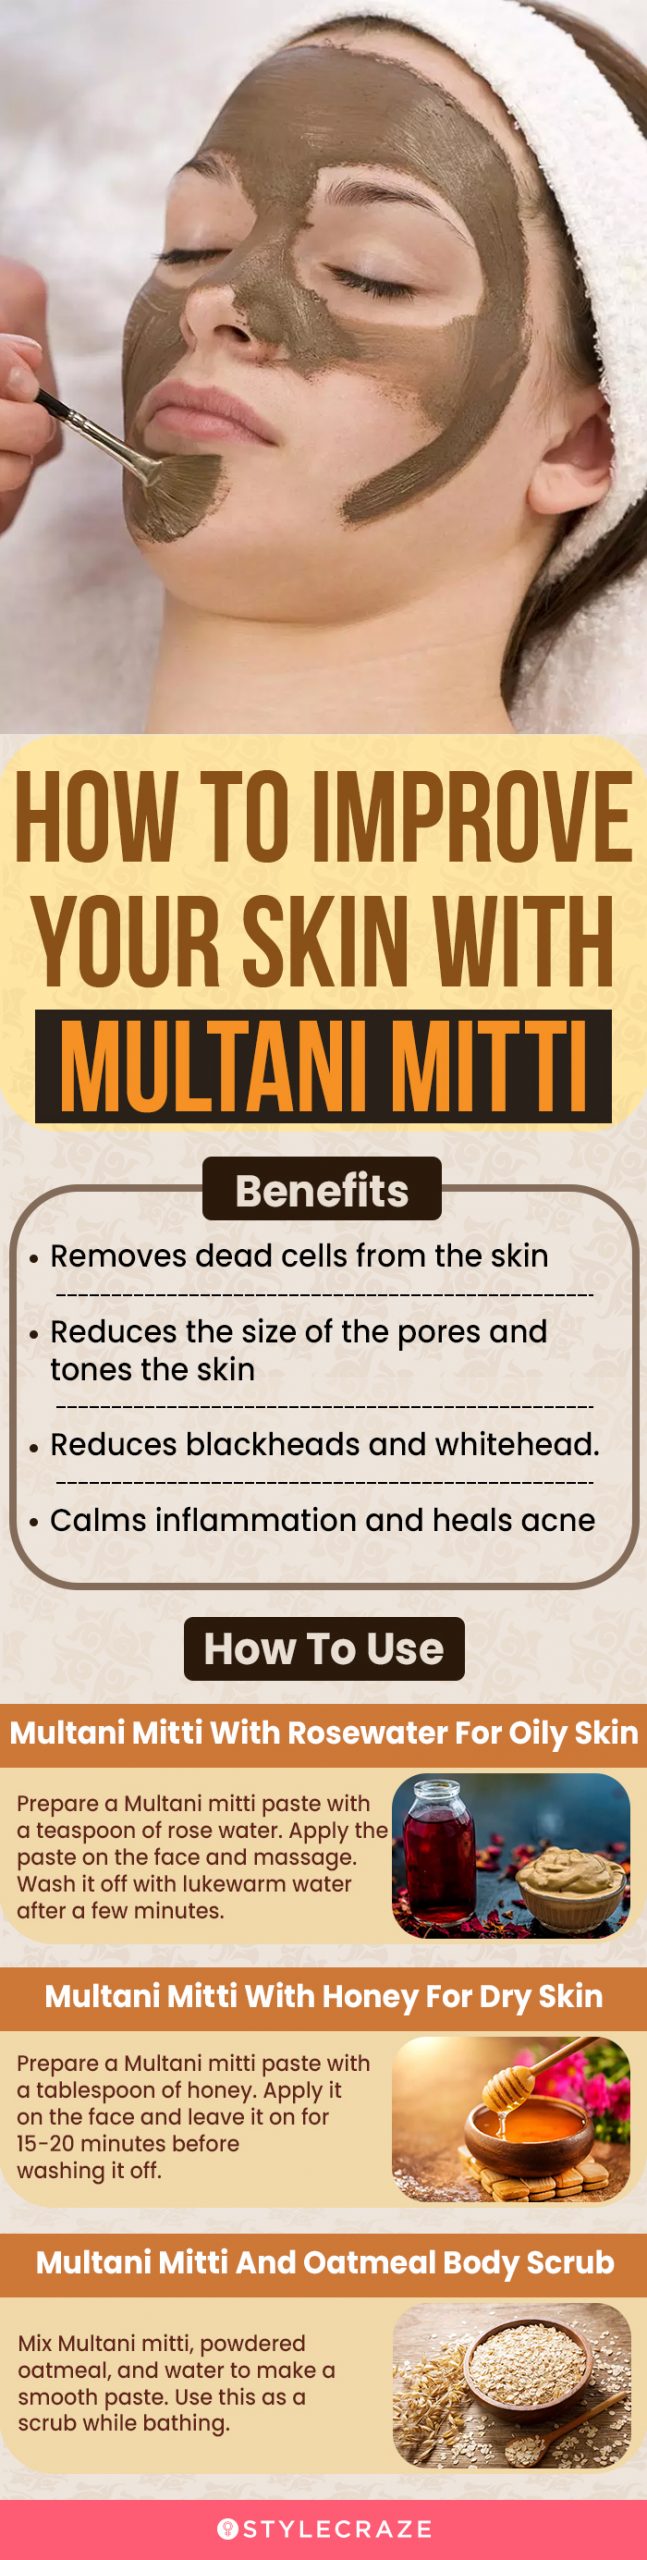 how to improve your skin with multani mitti (infographic)